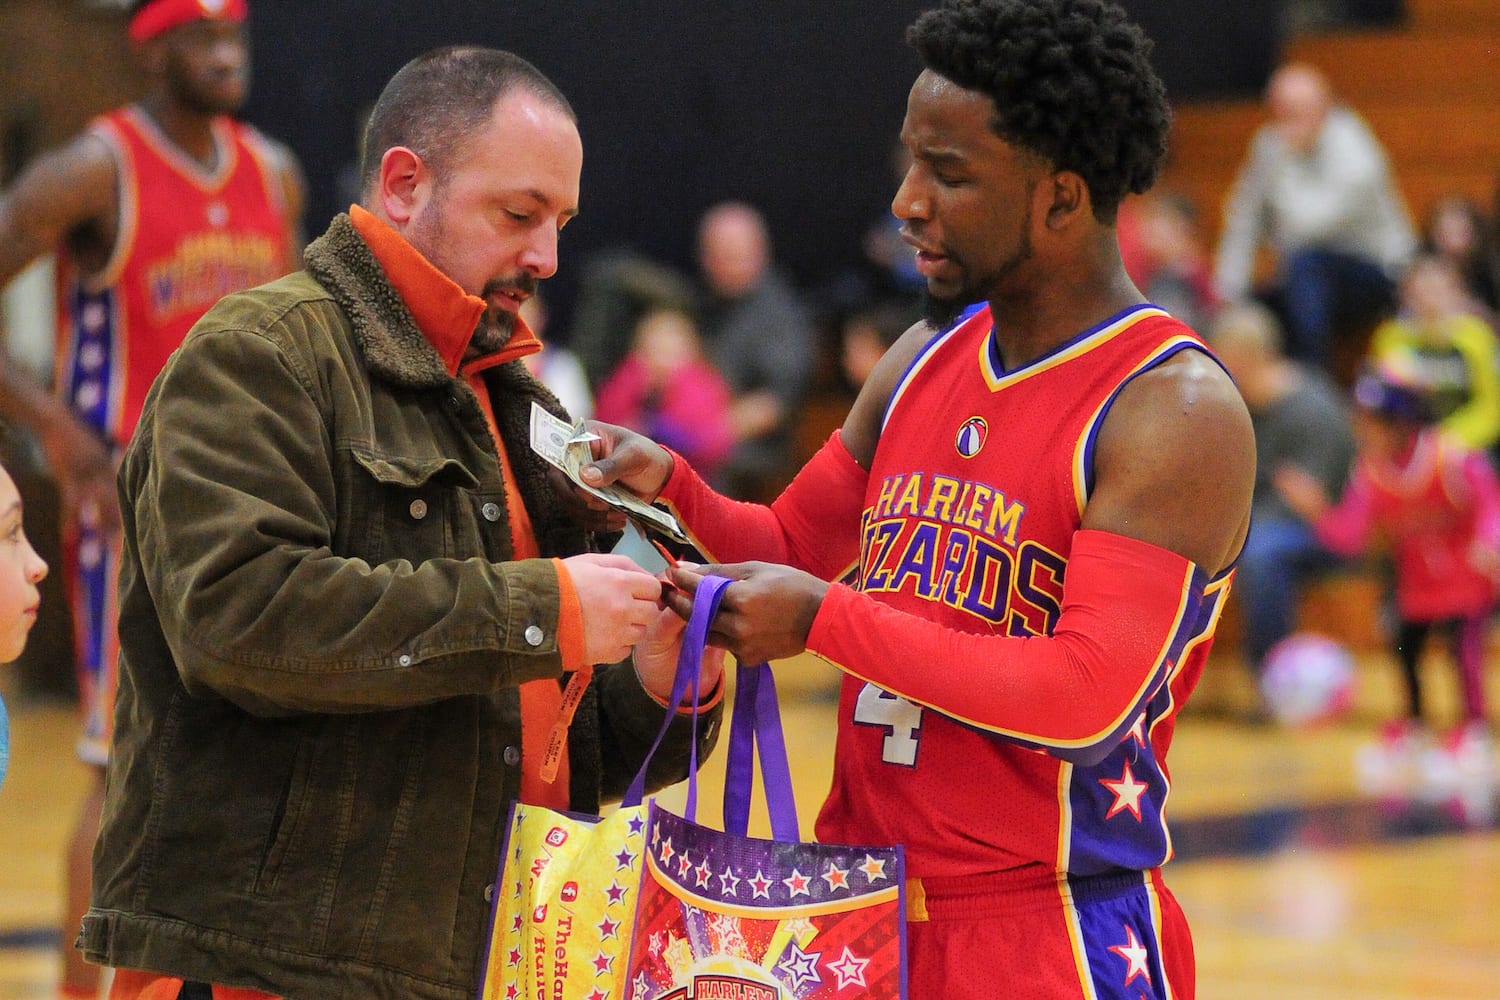 Harlem Wizards face off against Smithtown faculty